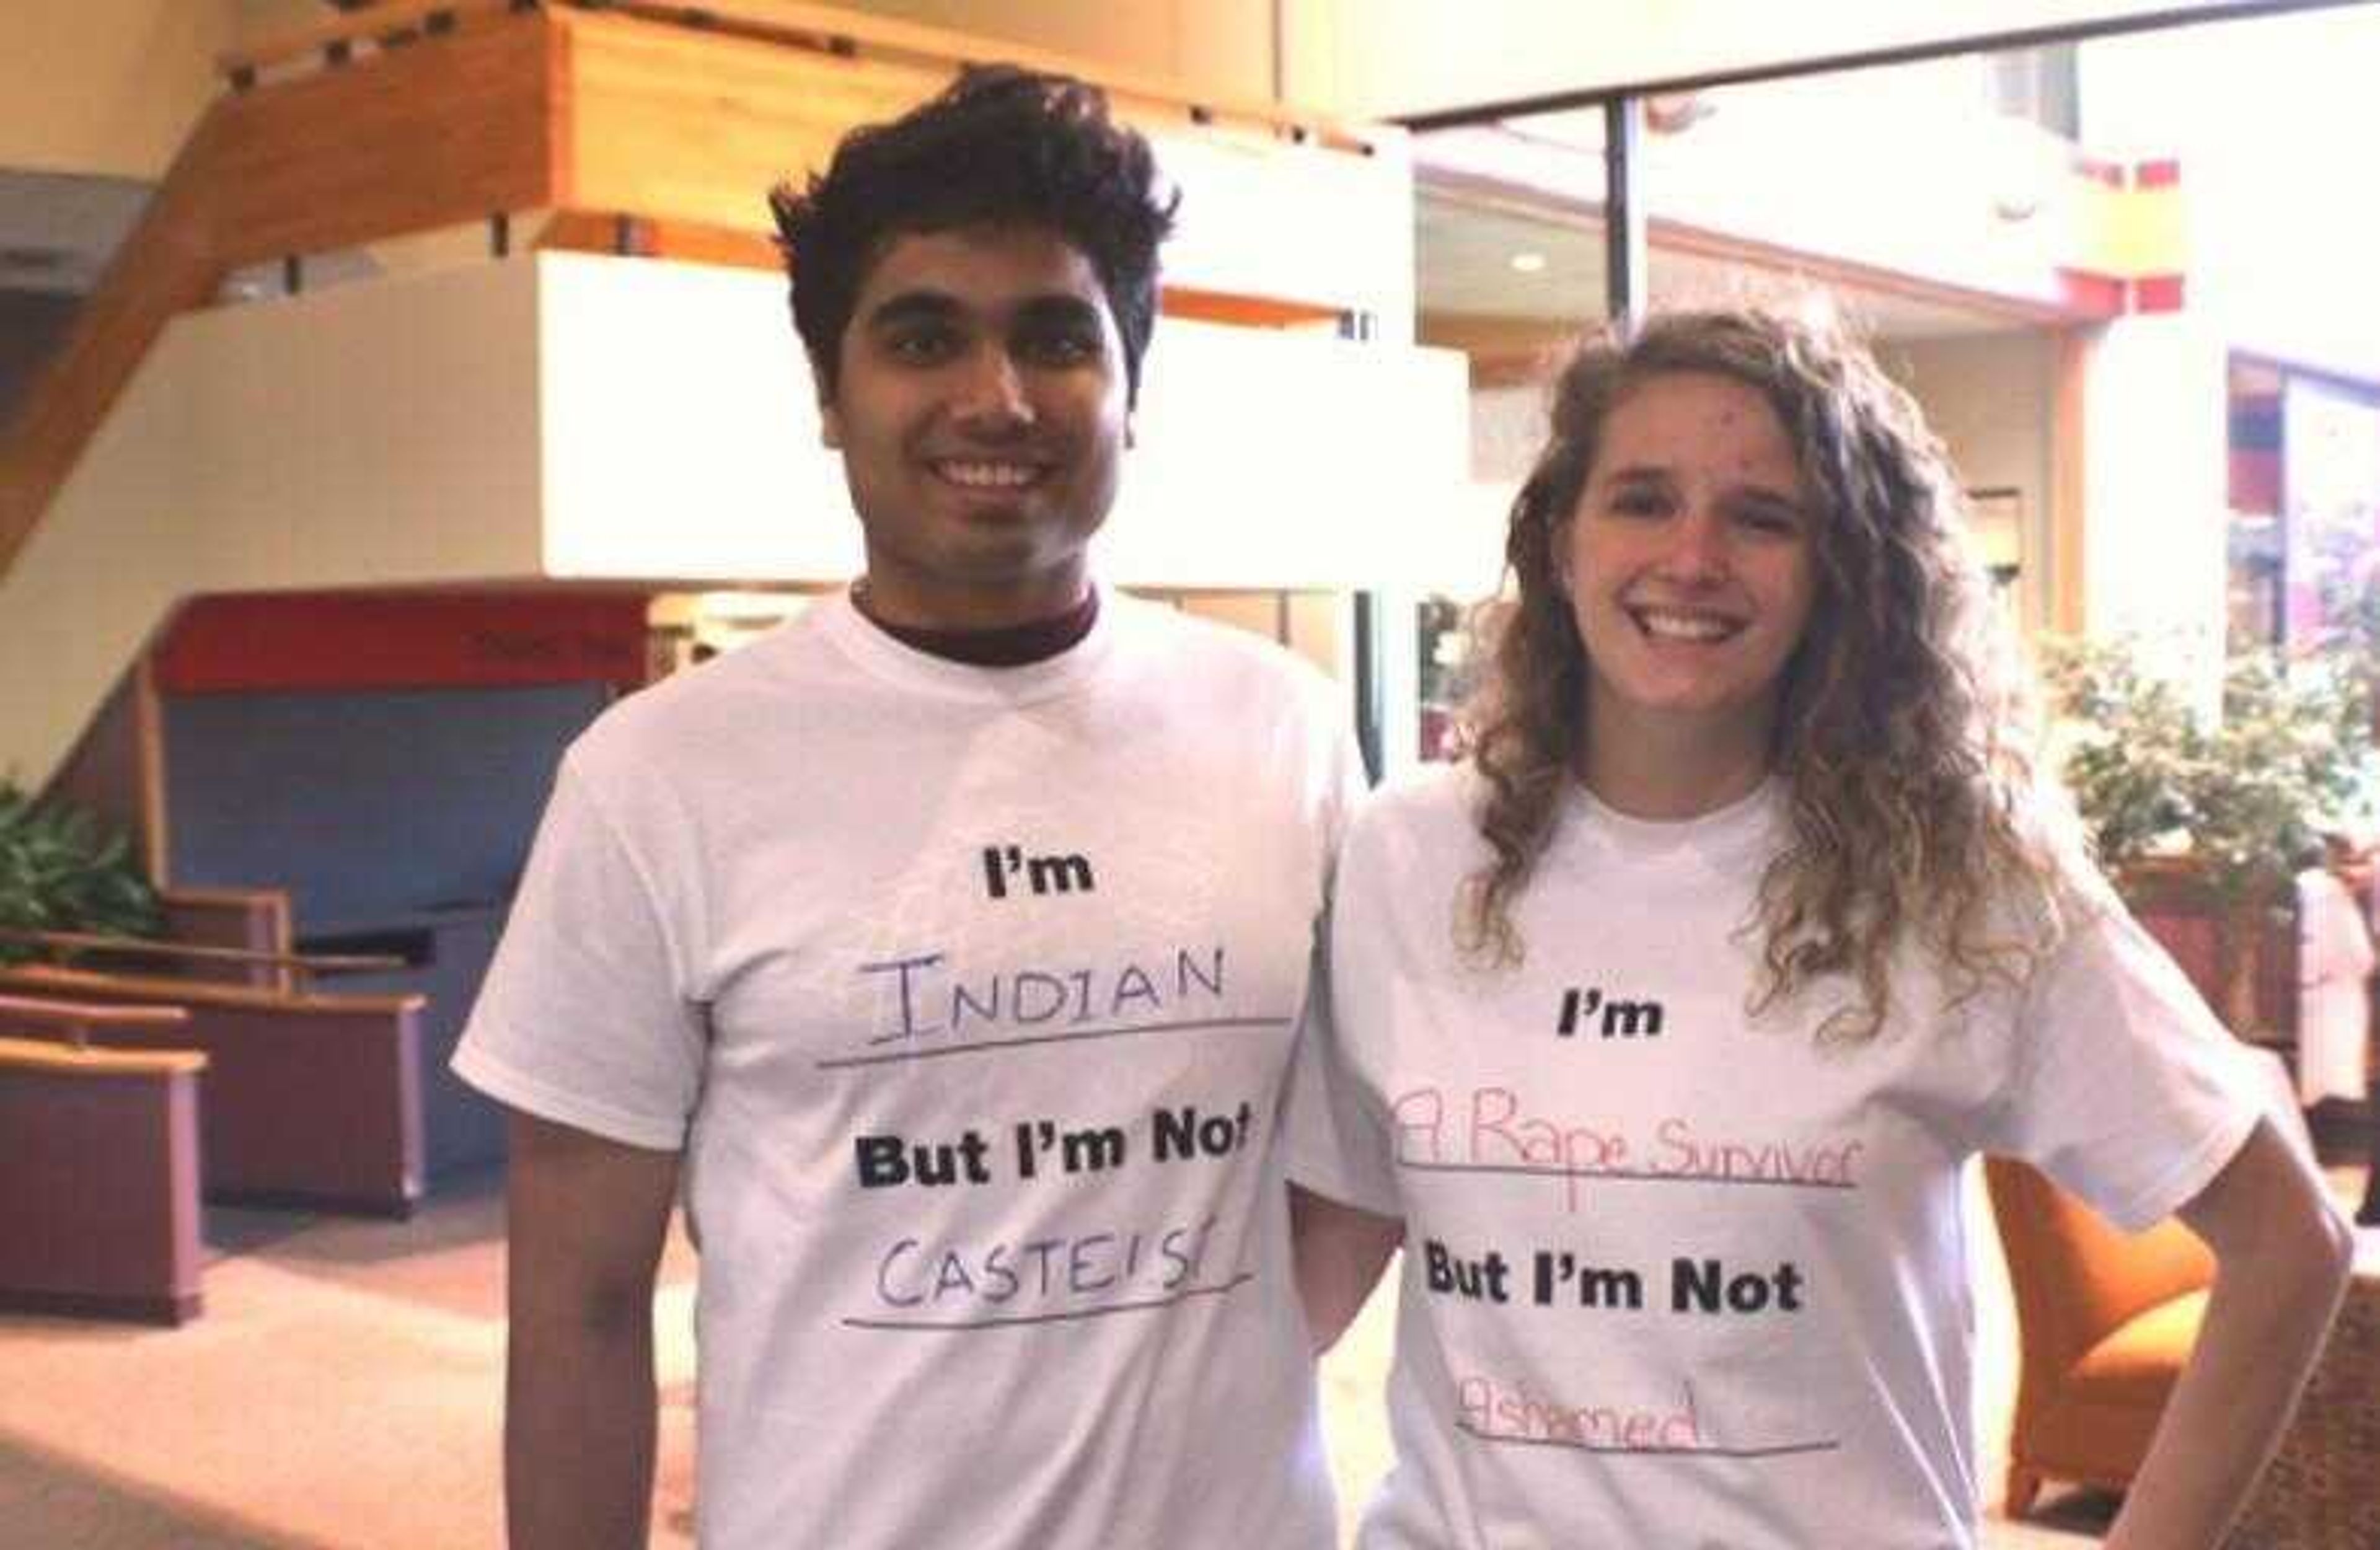 The PLA team created shirts that students could personalize to relate to their own experience of being stereotyped.